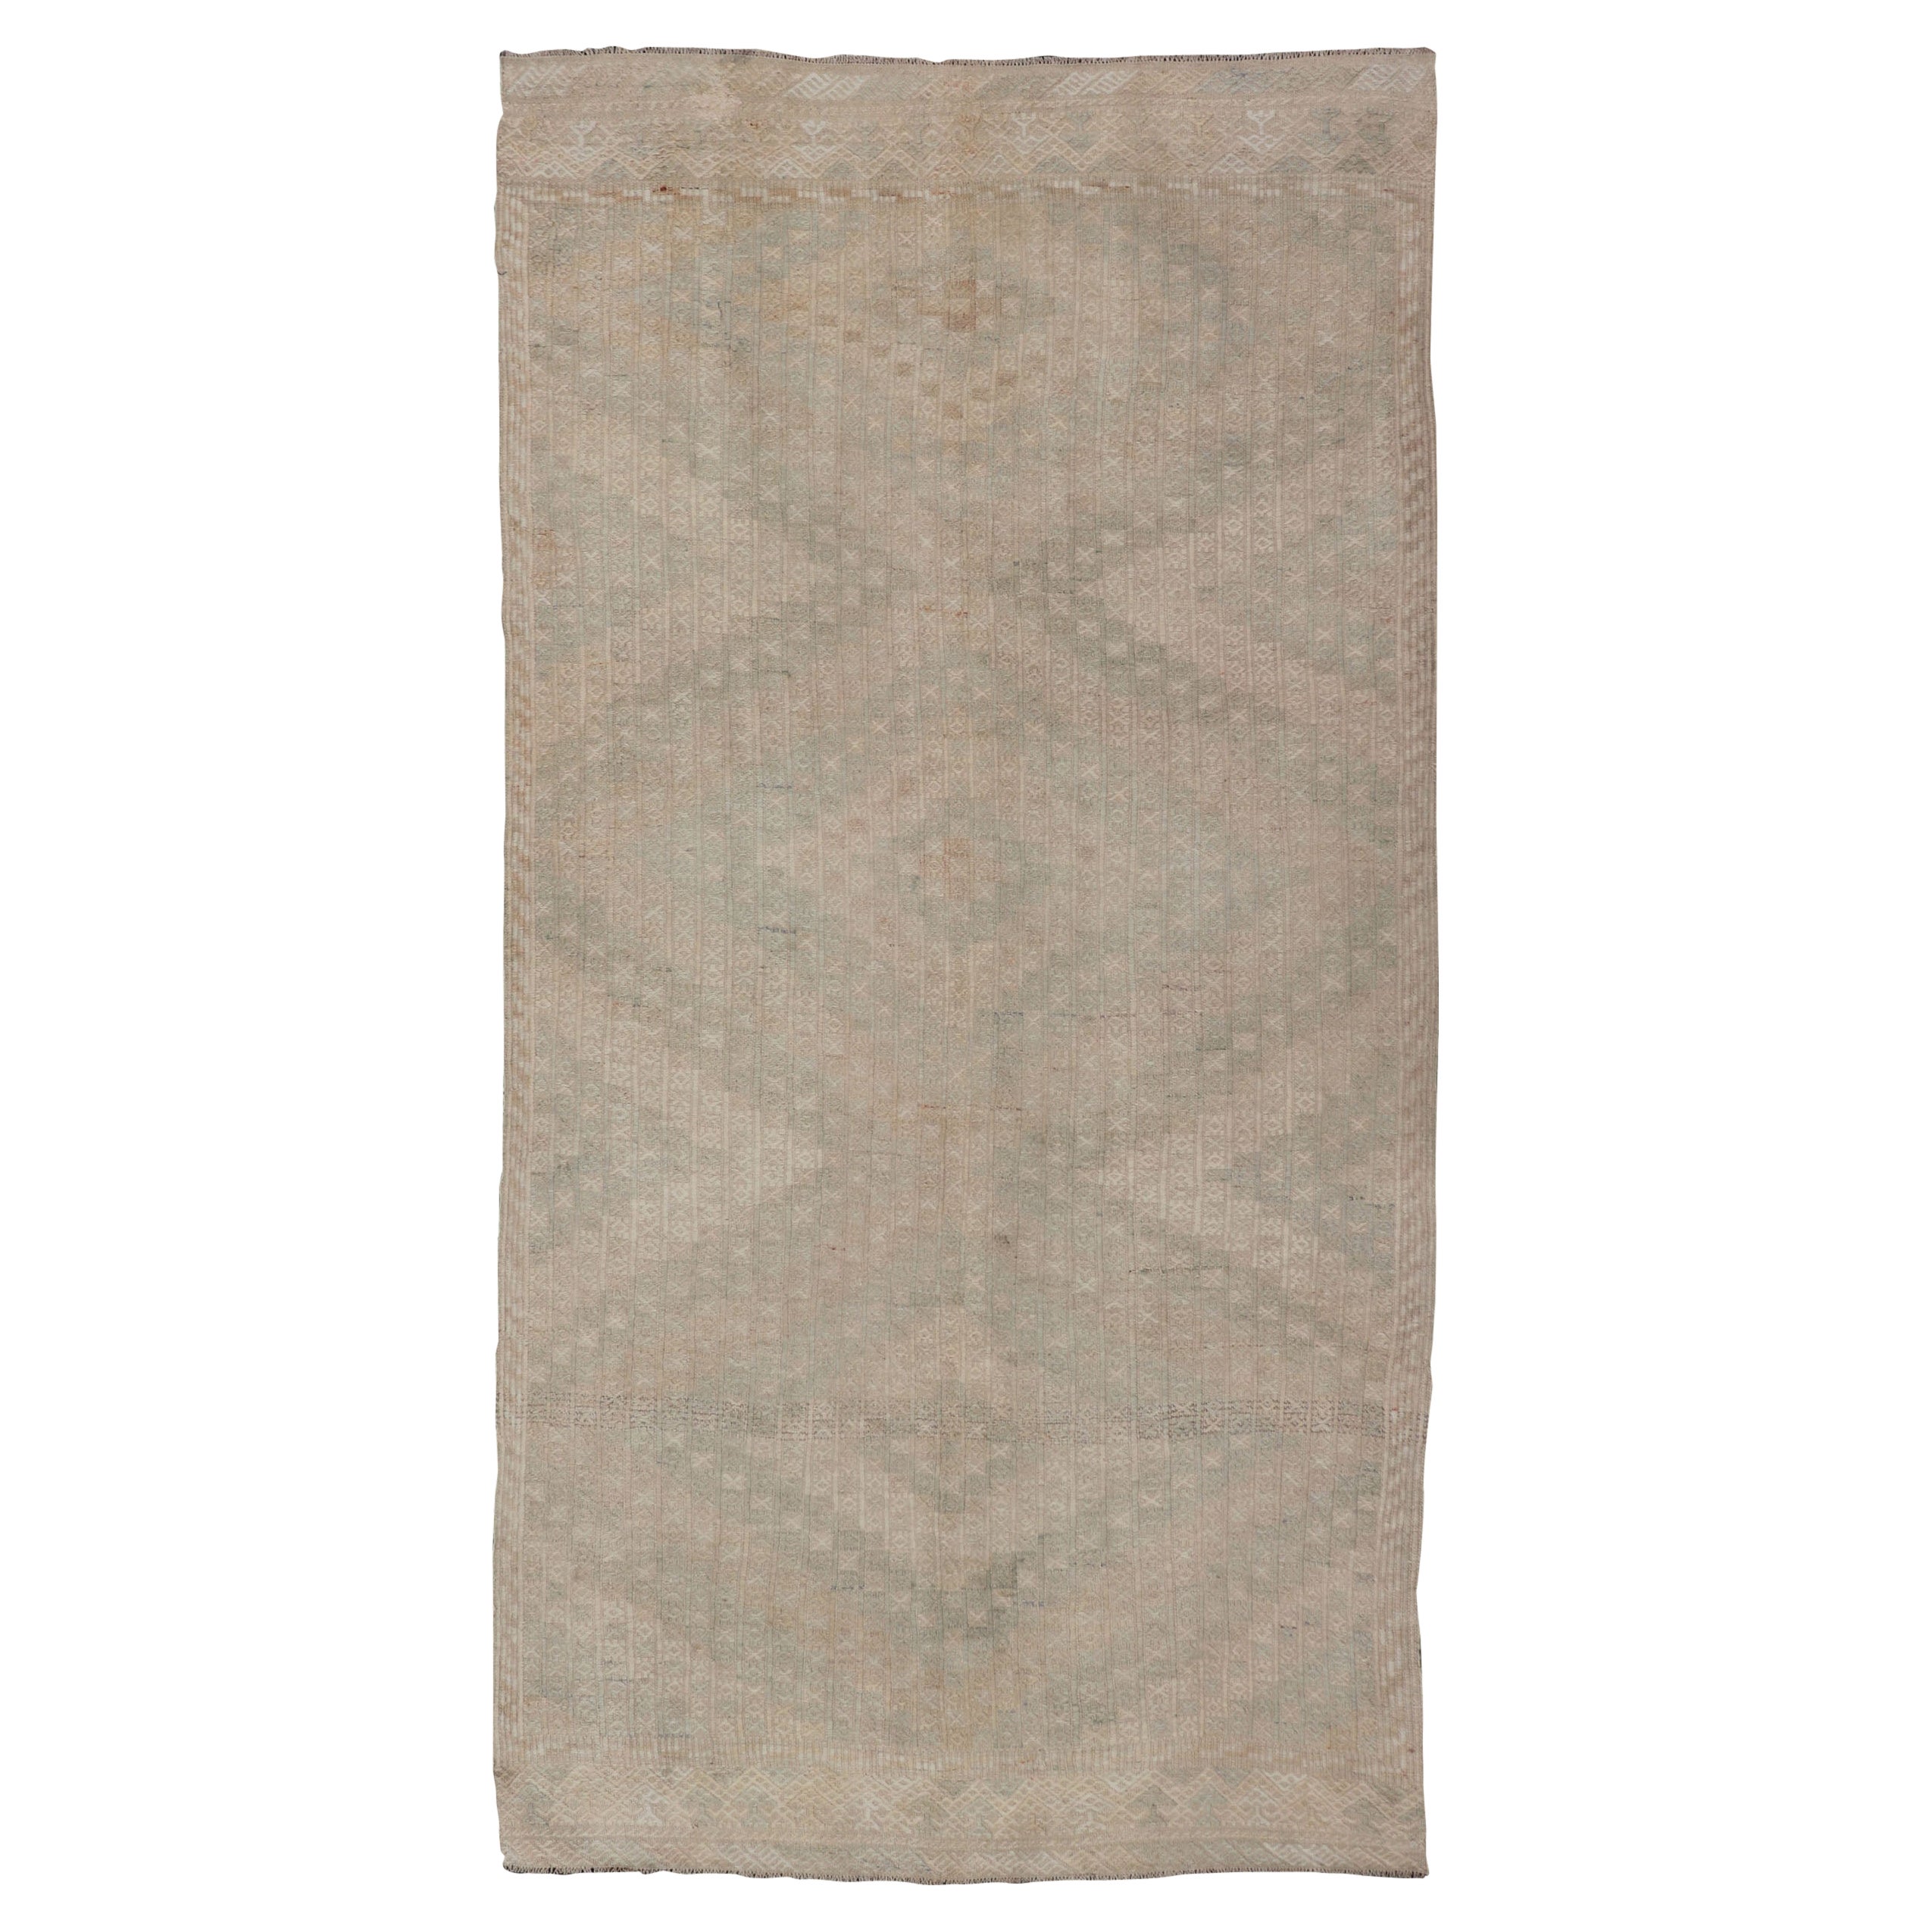 Vintage Gallery Turkish Embroidered Rug with Geometric Design in Soft Tones